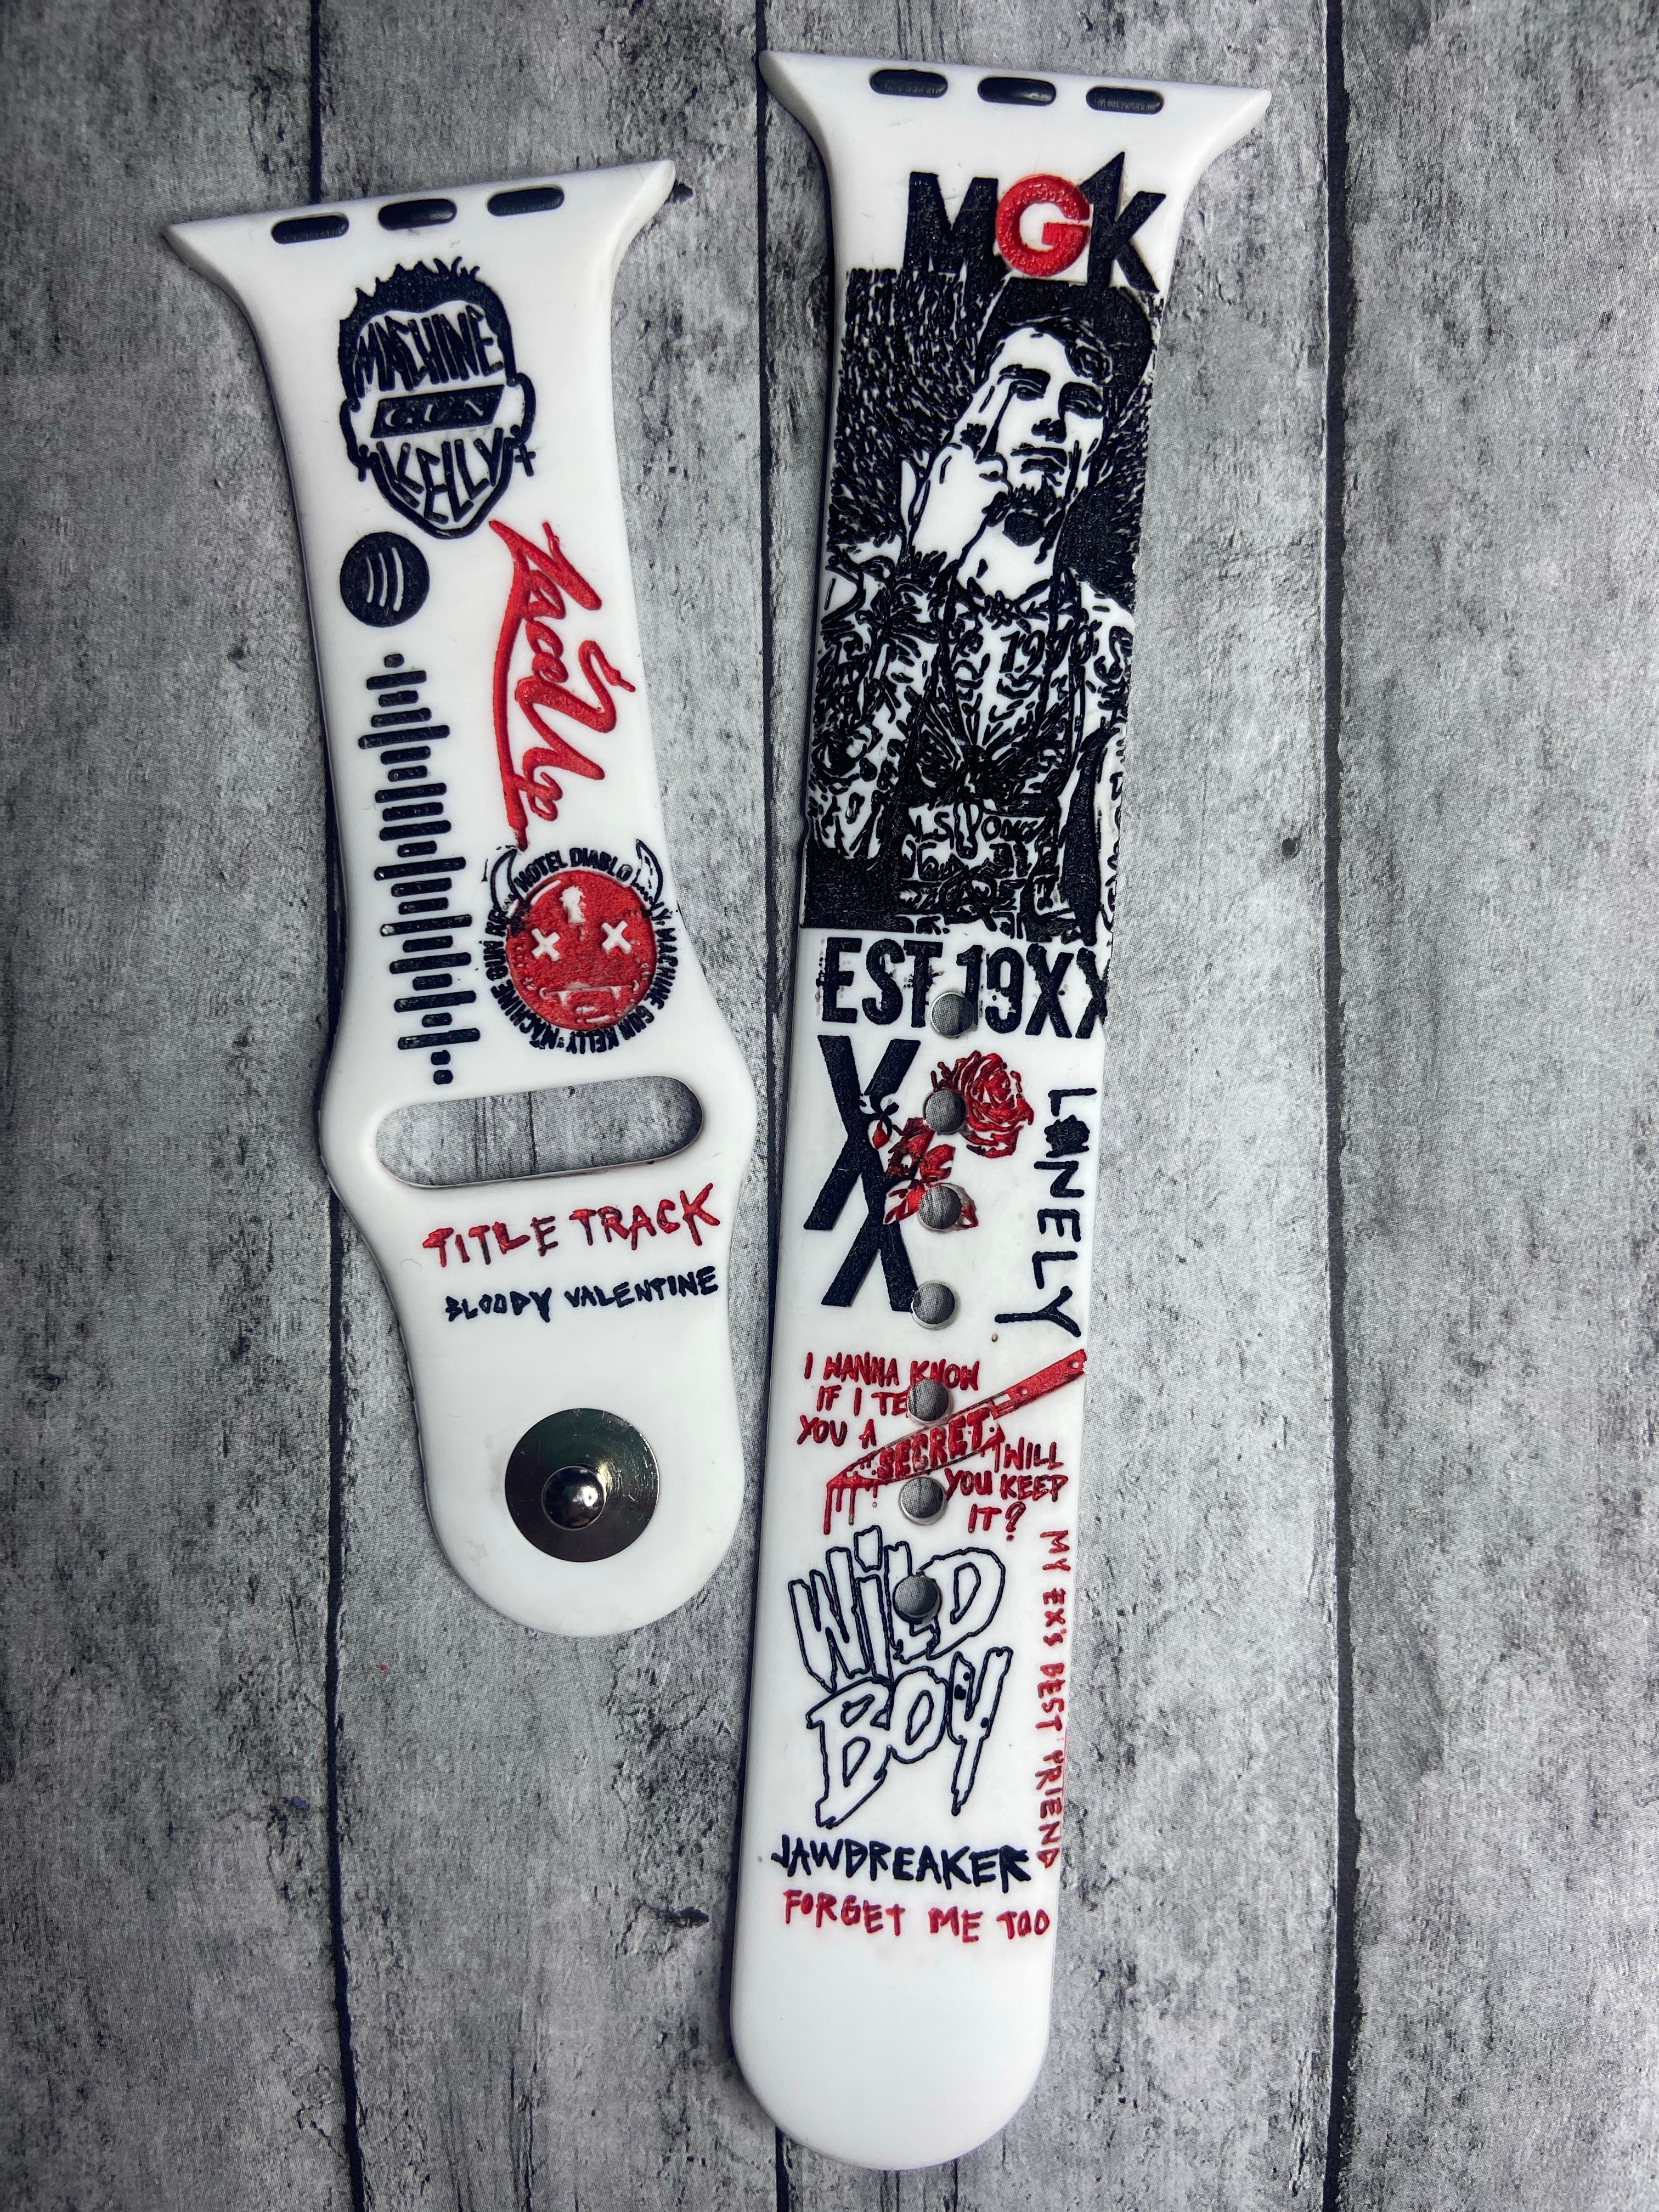 MGK engraved Apple watch band, music theme machine gun Kelly, engraved Samsung Watch band, LV supreme, gift, Fitbit Versa watch, gift for her